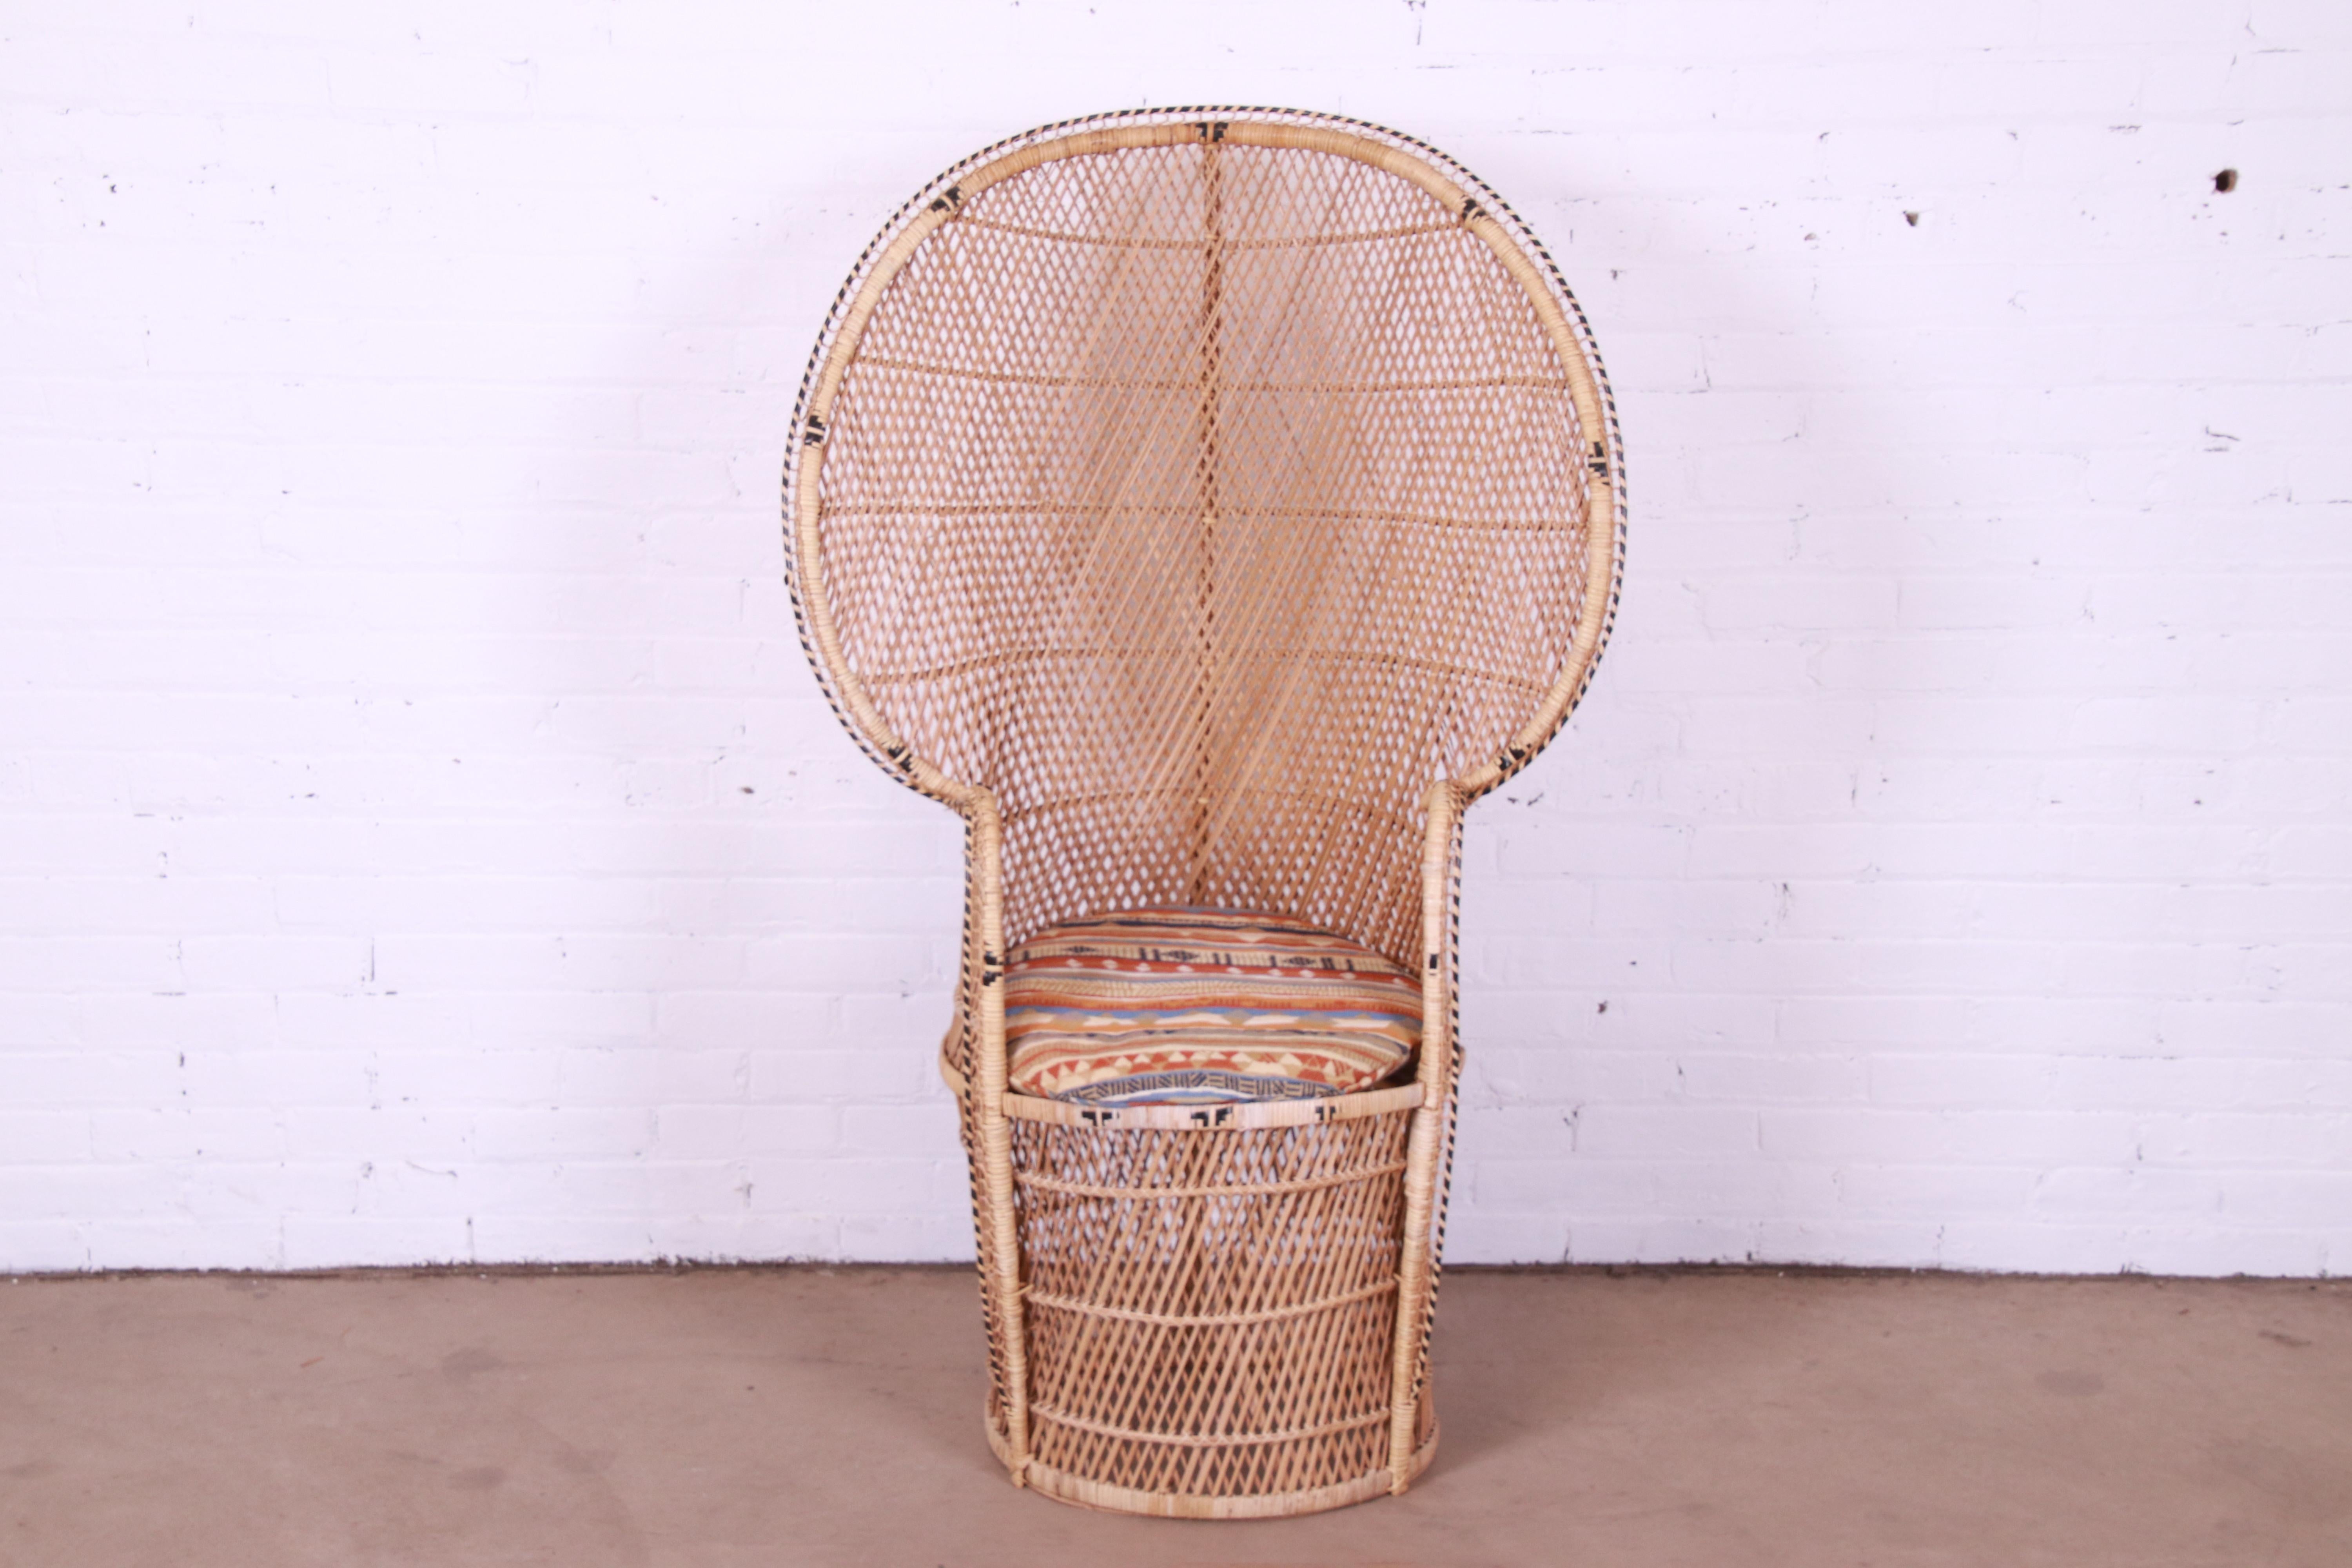 A gorgeous and iconic Mid-Century Modern Bohemian Emanuelle peacock chair.

Circa 1970s

Woven rattan and wicker, with a large scale fan back.

Measures: 32.75